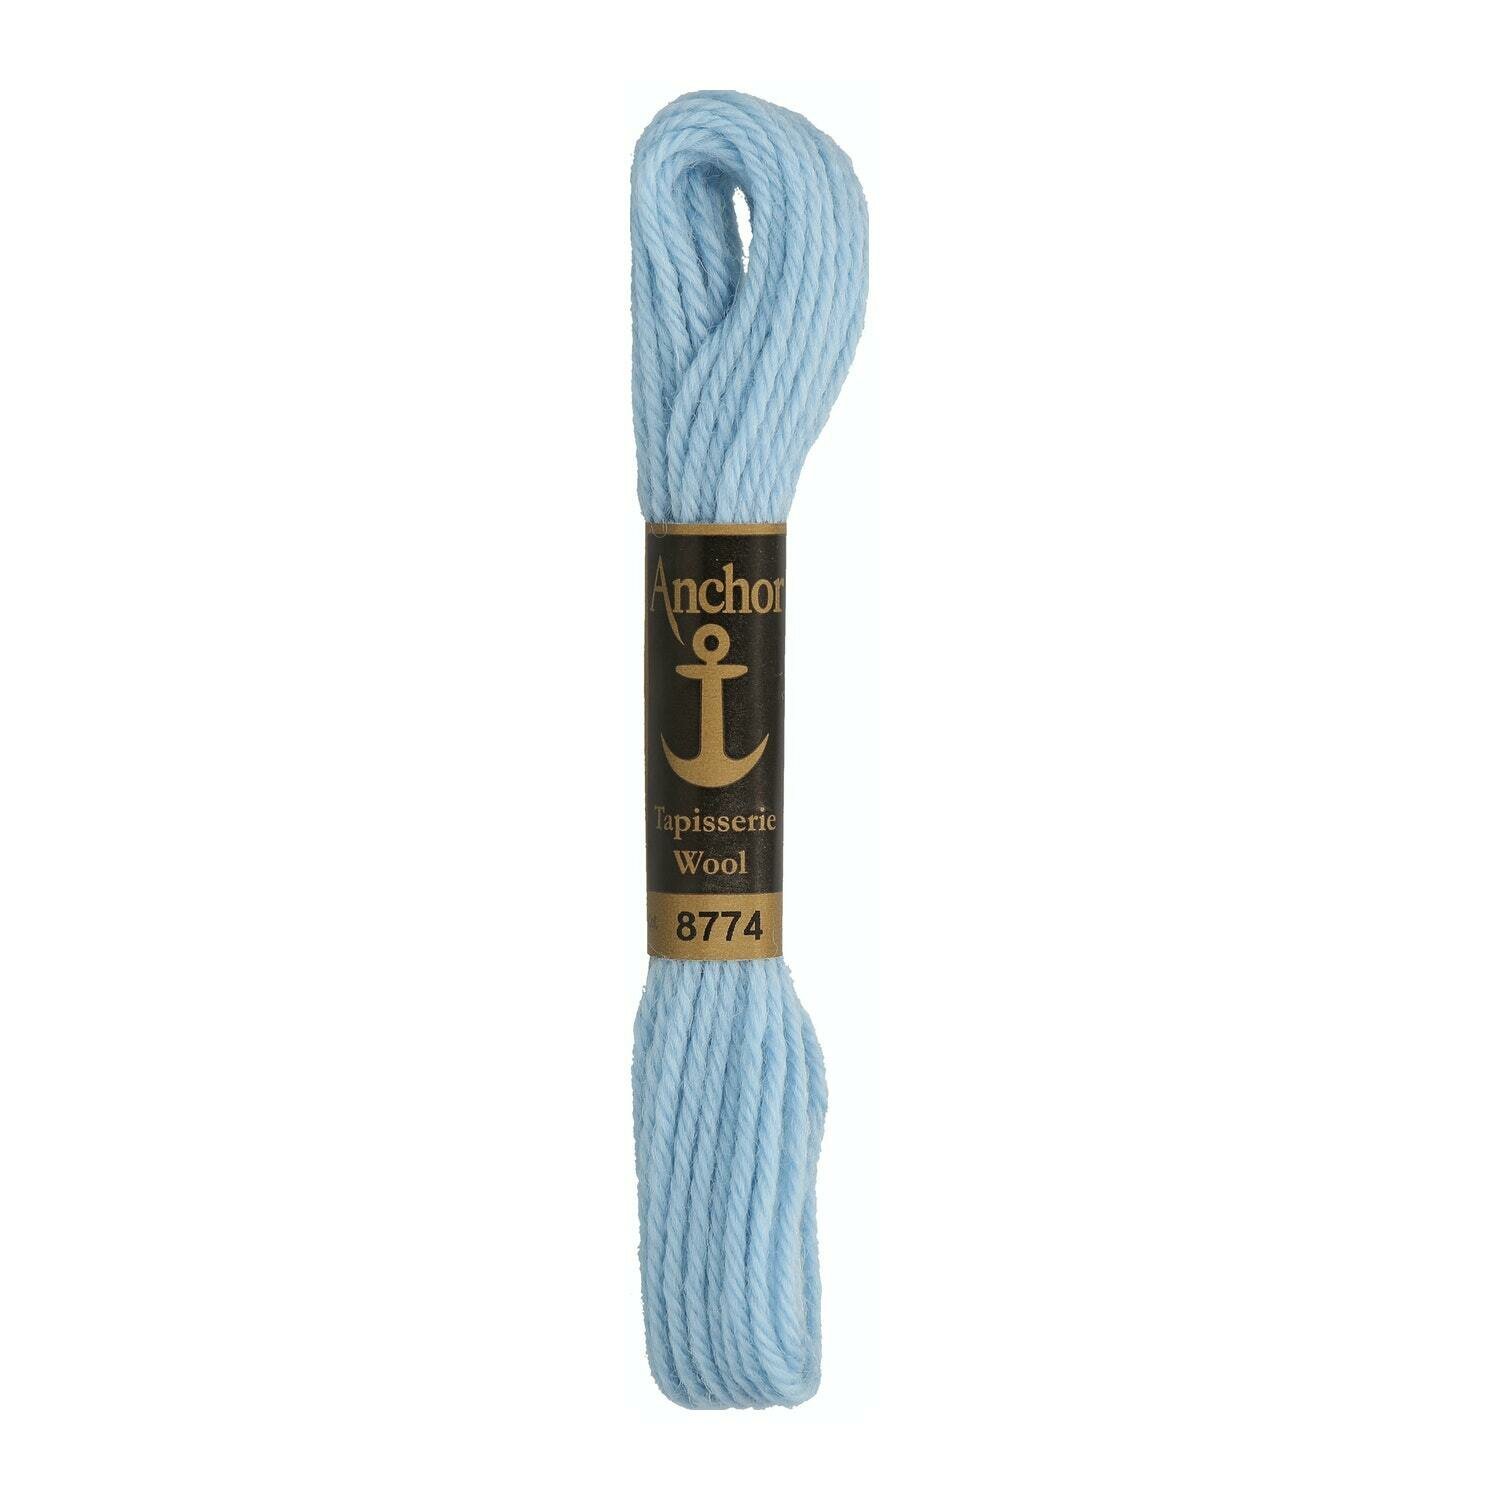 Anchor Tapisserie Wool #  08774